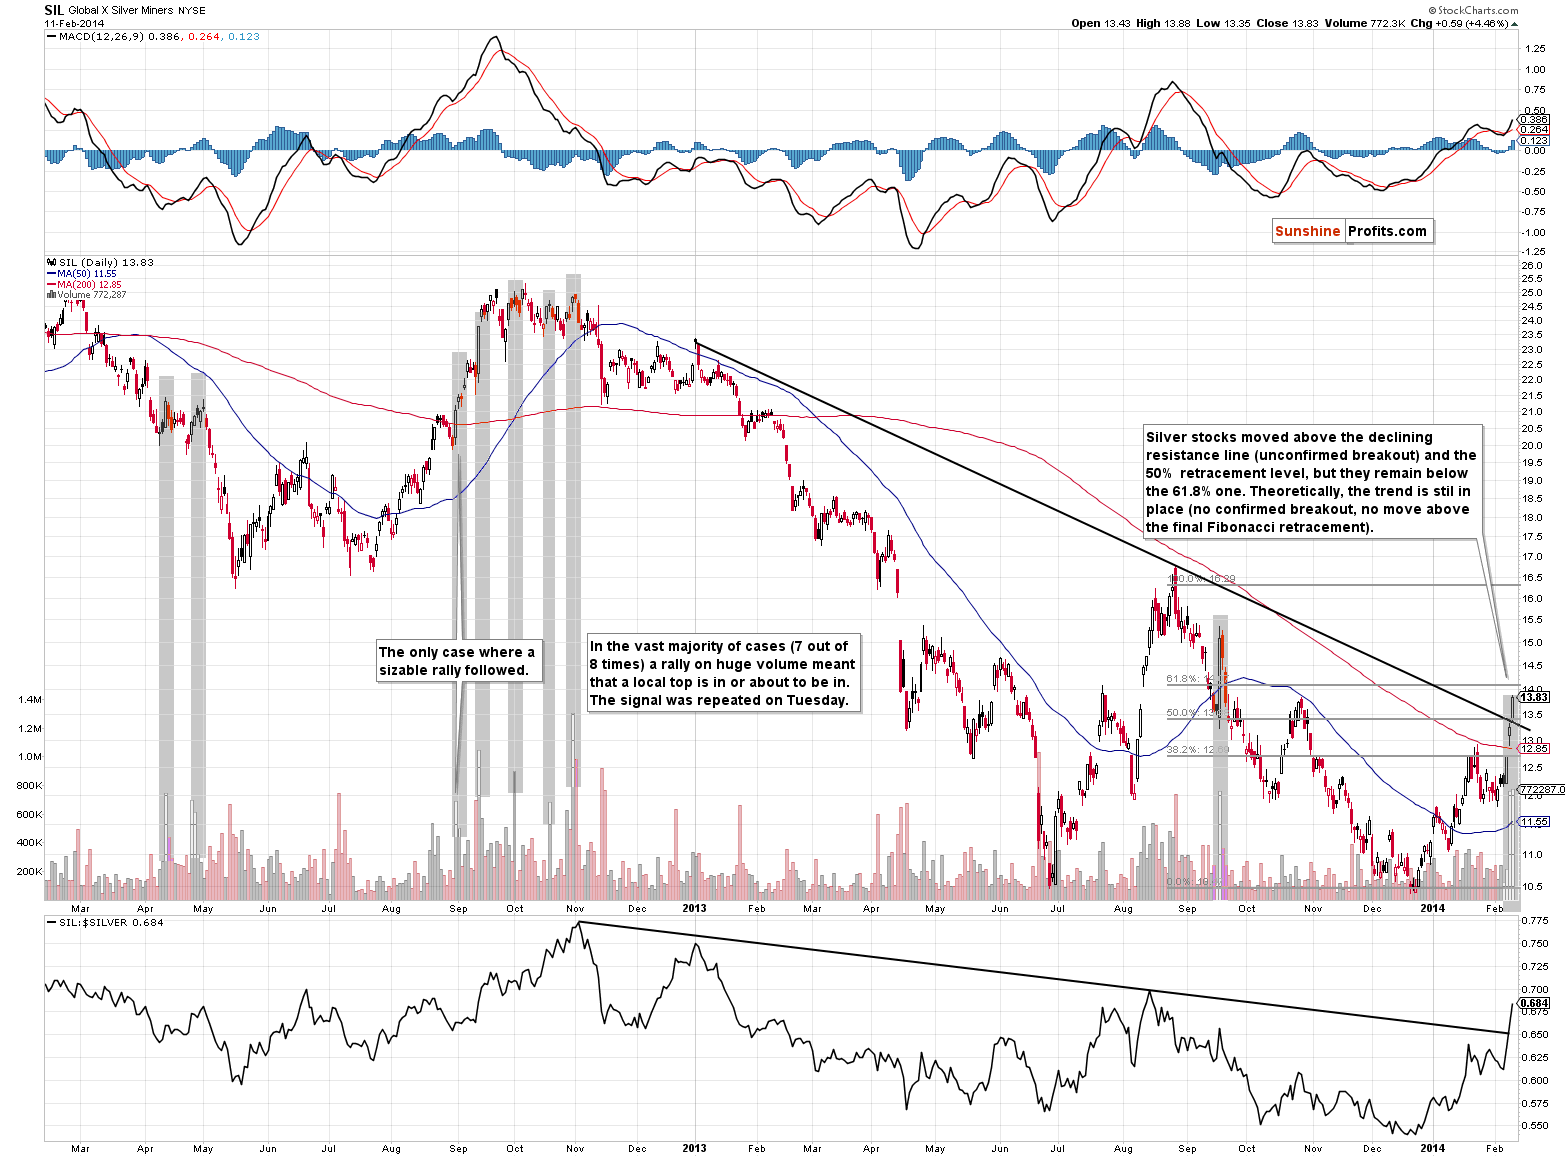 Global X Silver Miners - SIL long-term